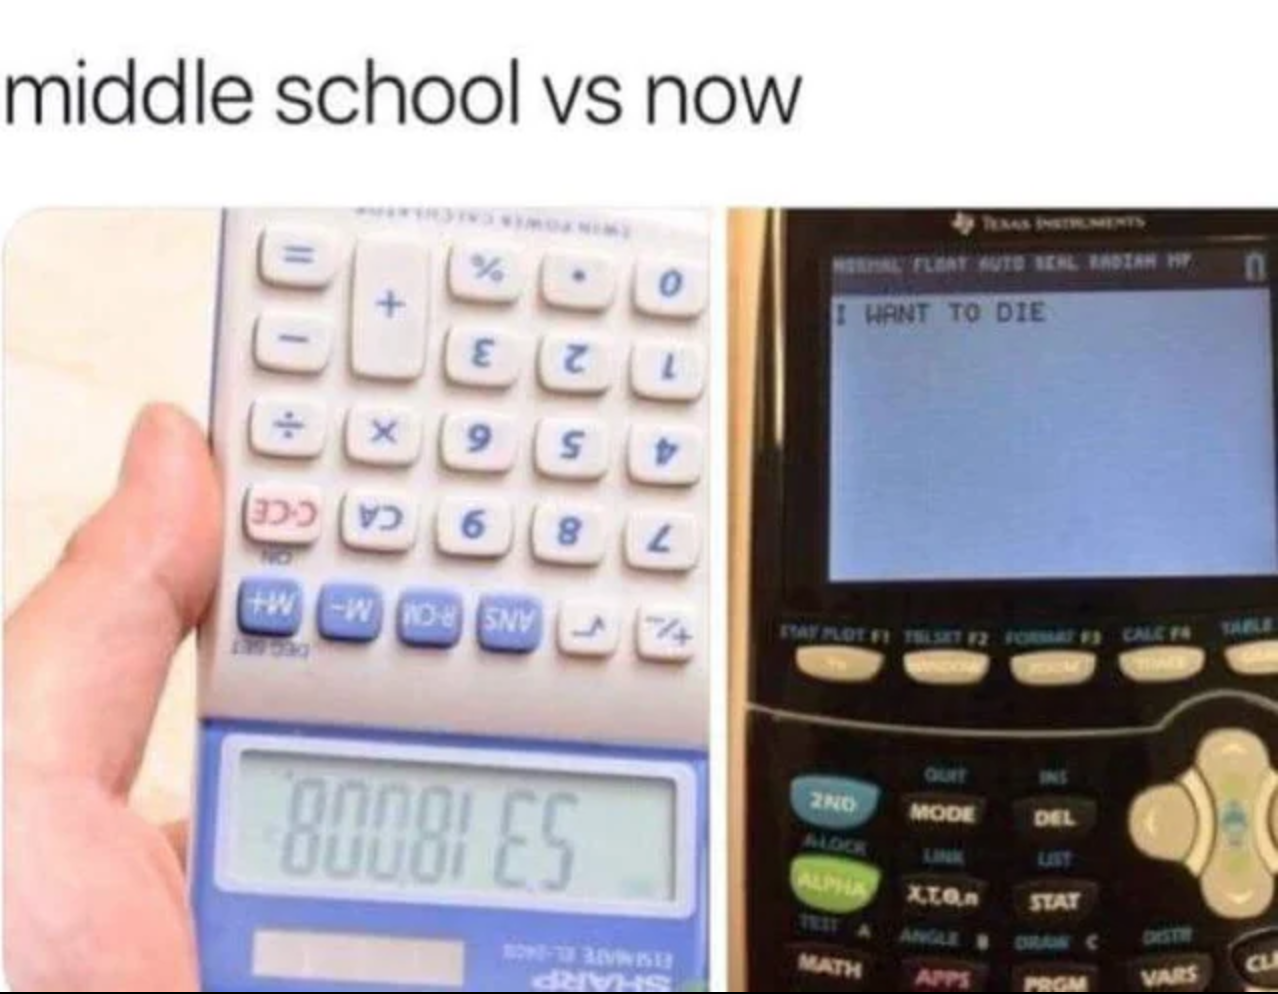 gaming memes and pics - boner at school meme - middle school vs now I Hant To Die 2 95 Ca Oce 6 78 Ans M M Mere 2 Calere 20 80081 Es Mode Del To Slat Mon Vads